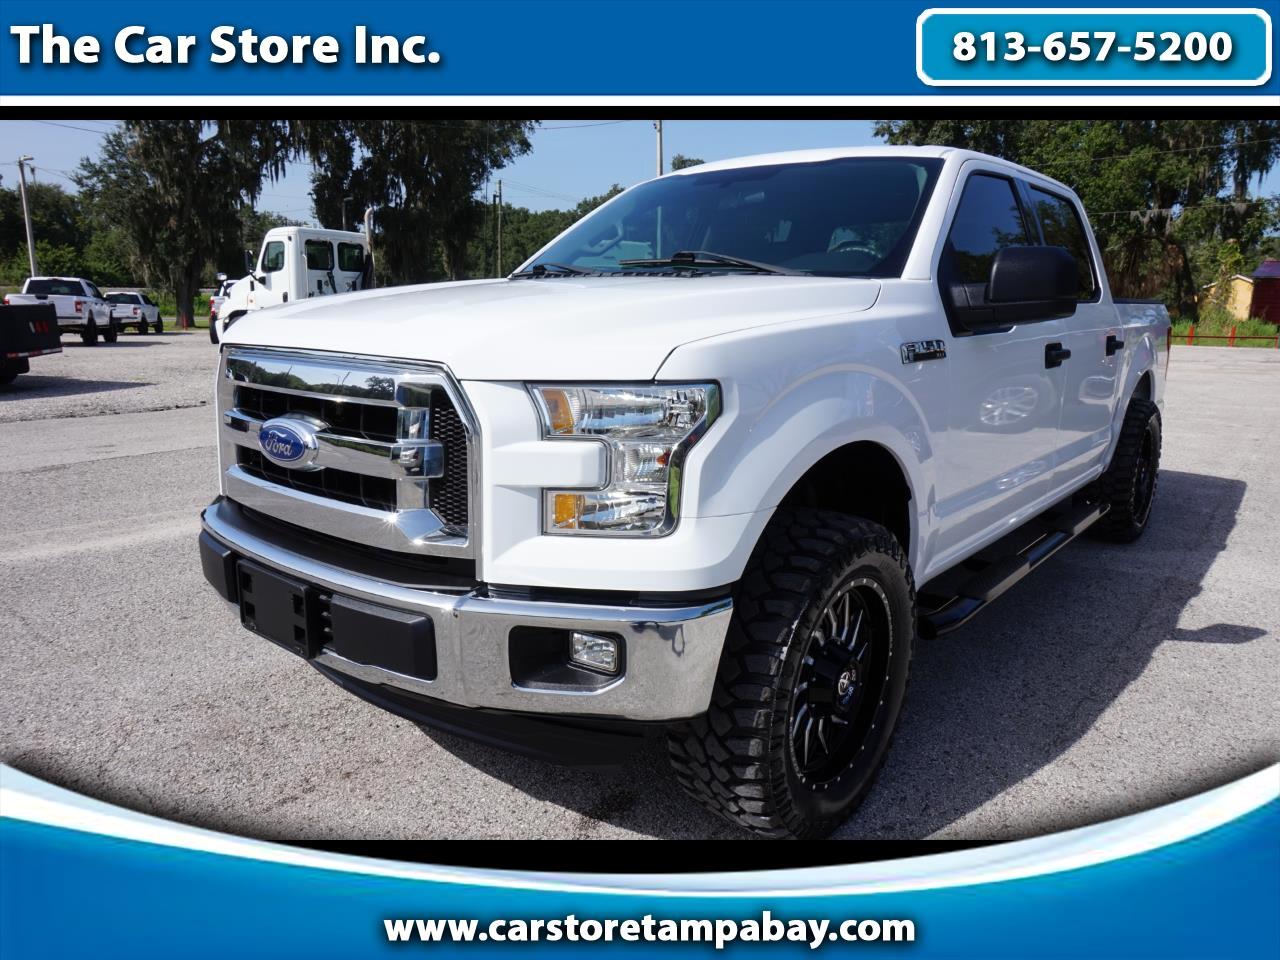 Ford F-150 XLT SuperCrew 5.5-ft. Bed 2WD 2017